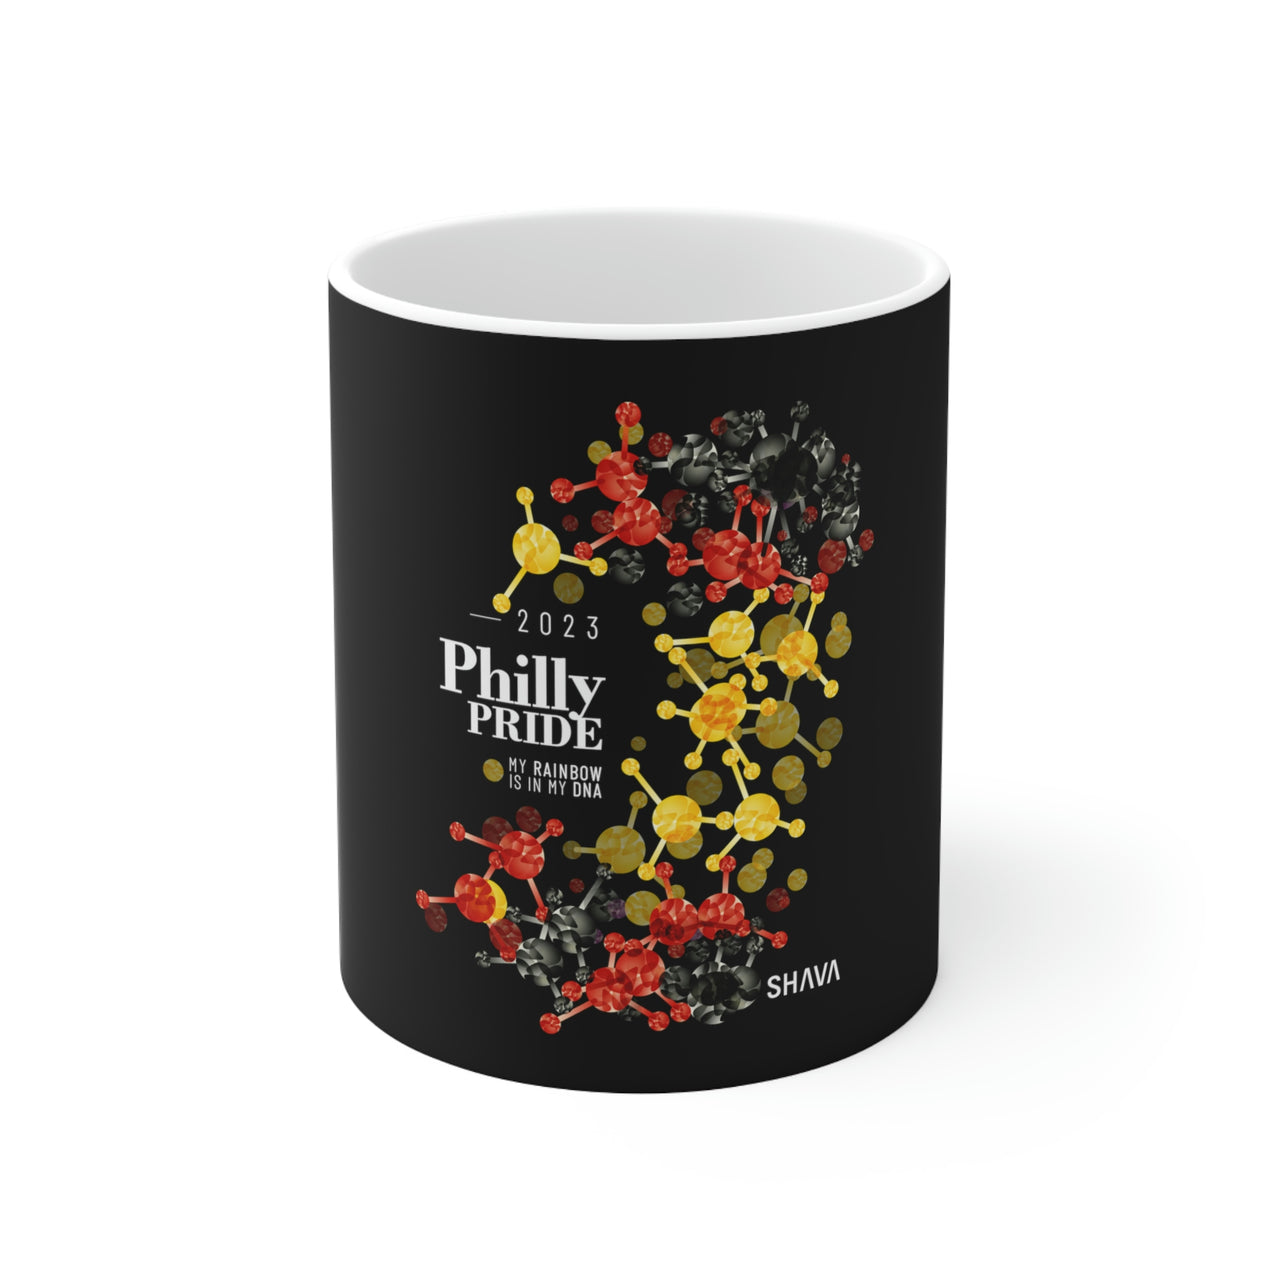 Rubber Philly Pride Ceramic Mug - Rainbow Is In My DNA SHAVA CO